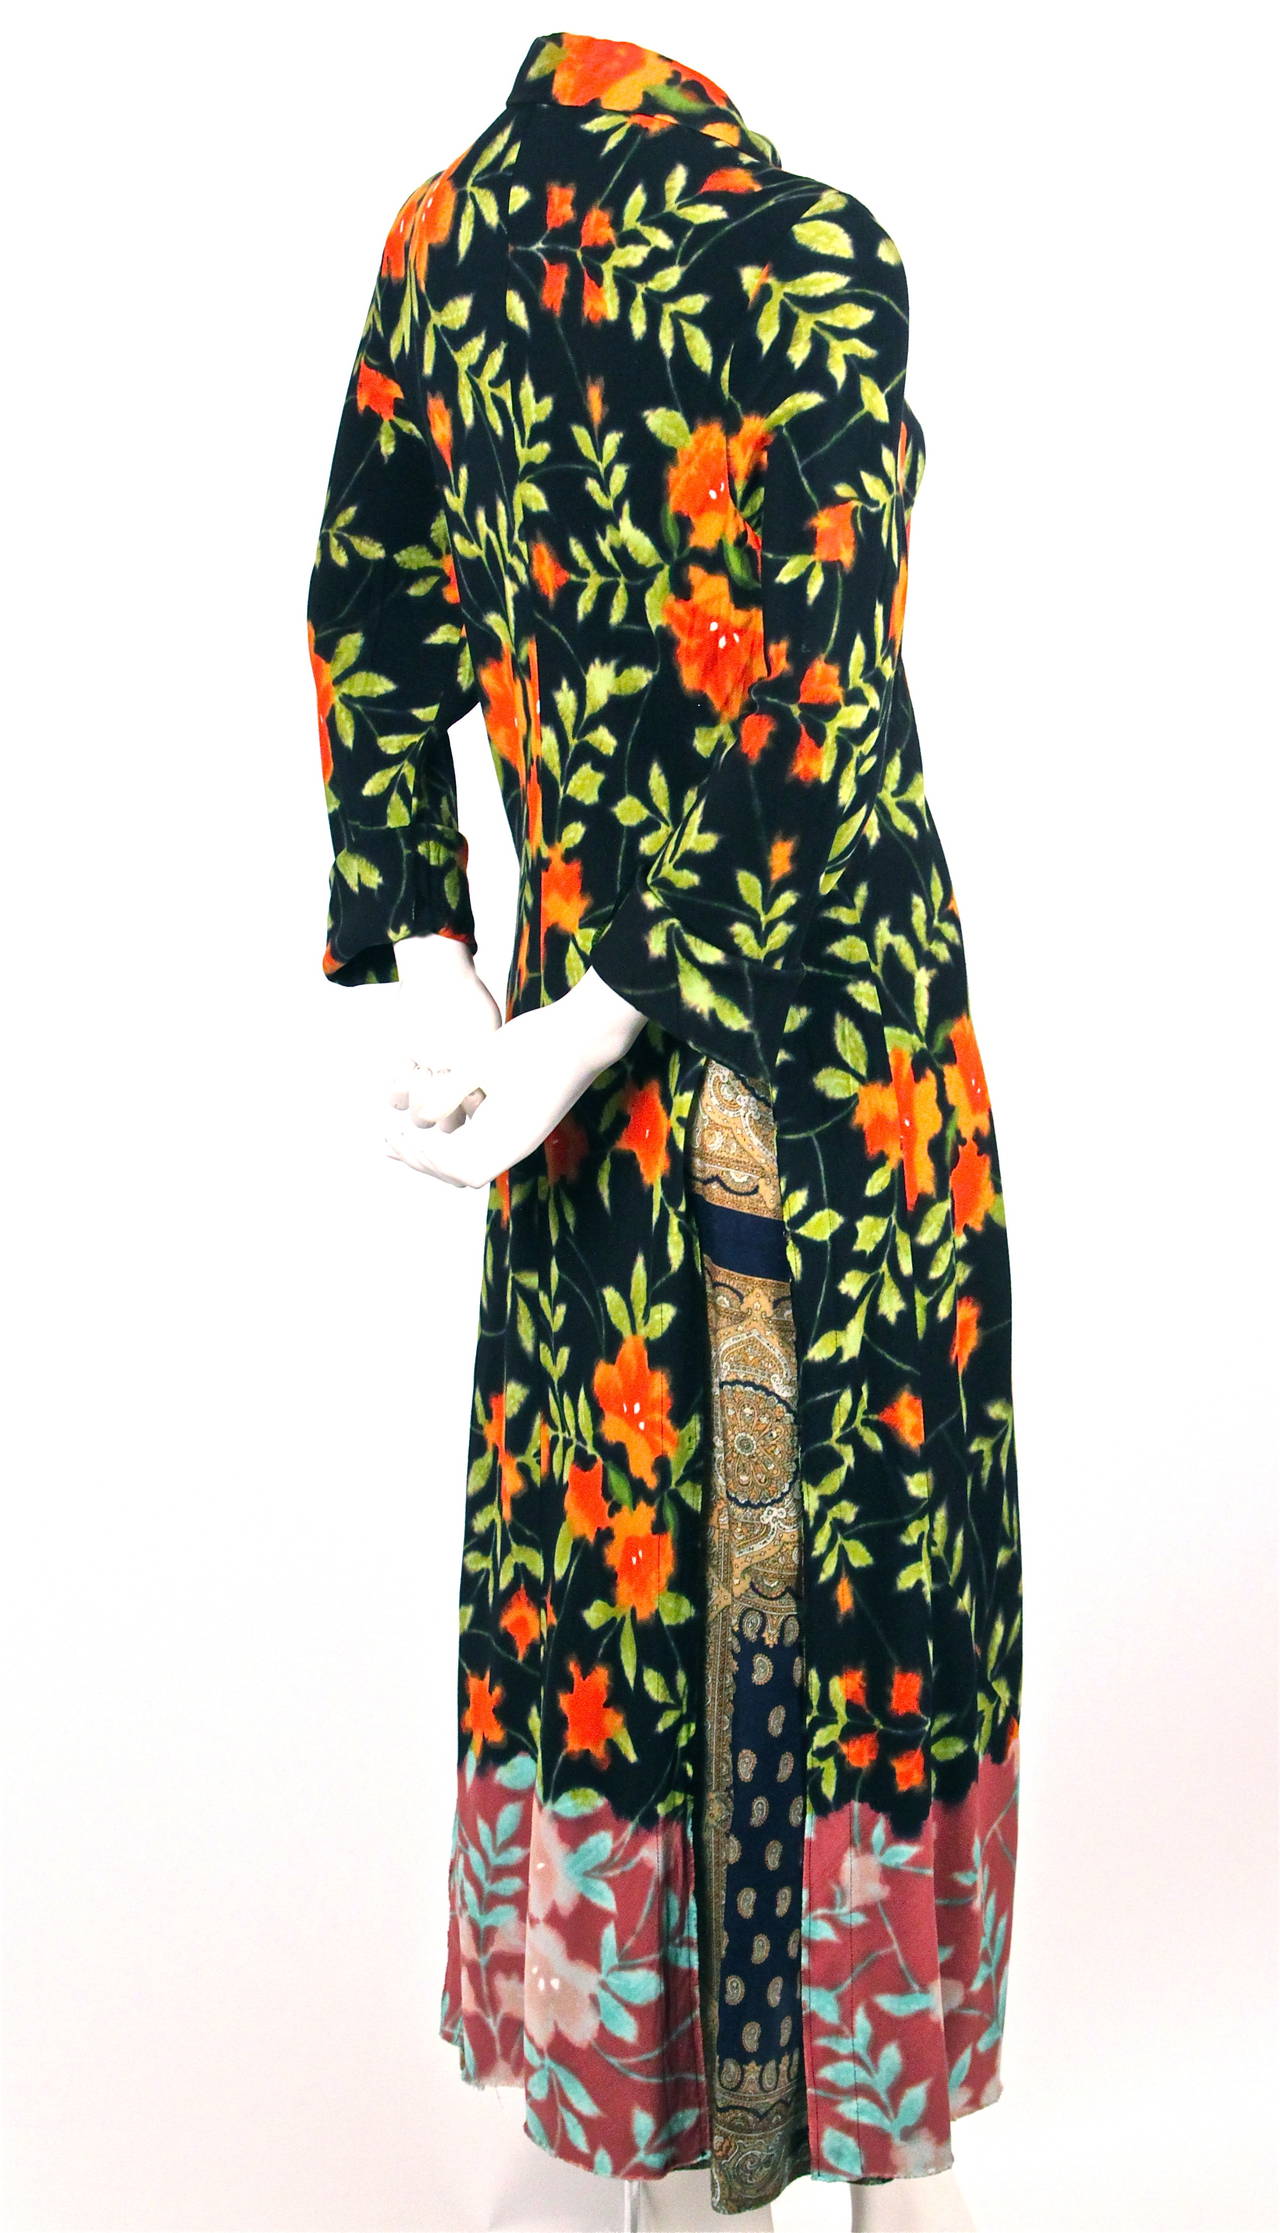 Long floral jacket with adjustable hook/eye closures and long button front skirt in contrasting fabric from Comme des Garcons dating to spring of 1993. Pieces can also be worn as separates. Size M. Best fits a US 4-6. Skirt has a 26